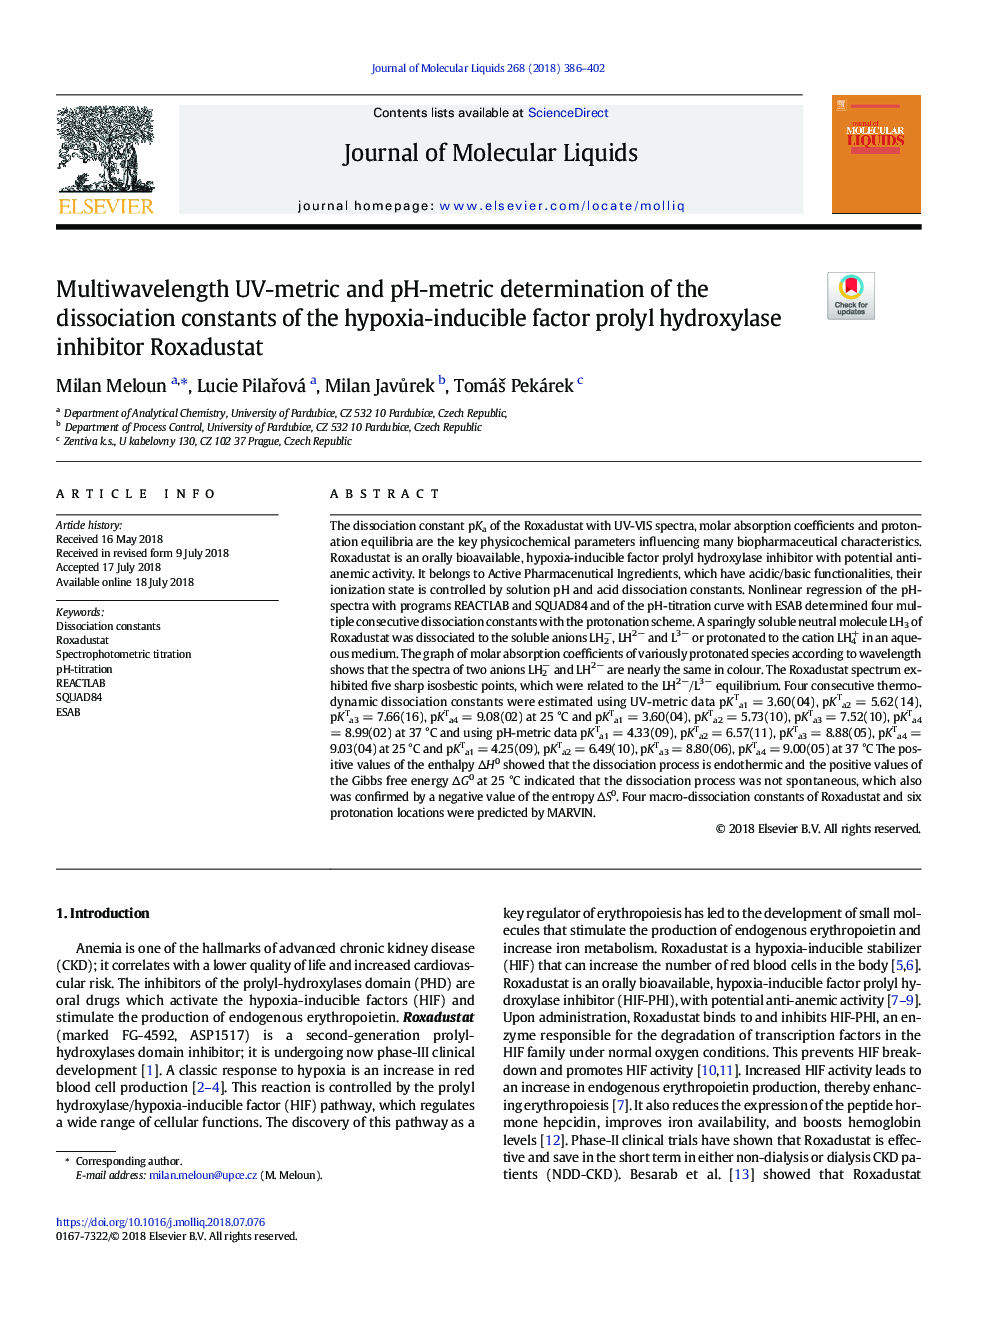 Multiwavelength UV-metric and pH-metric determination of the dissociation constants of the hypoxia-inducible factor prolyl hydroxylase inhibitor Roxadustat